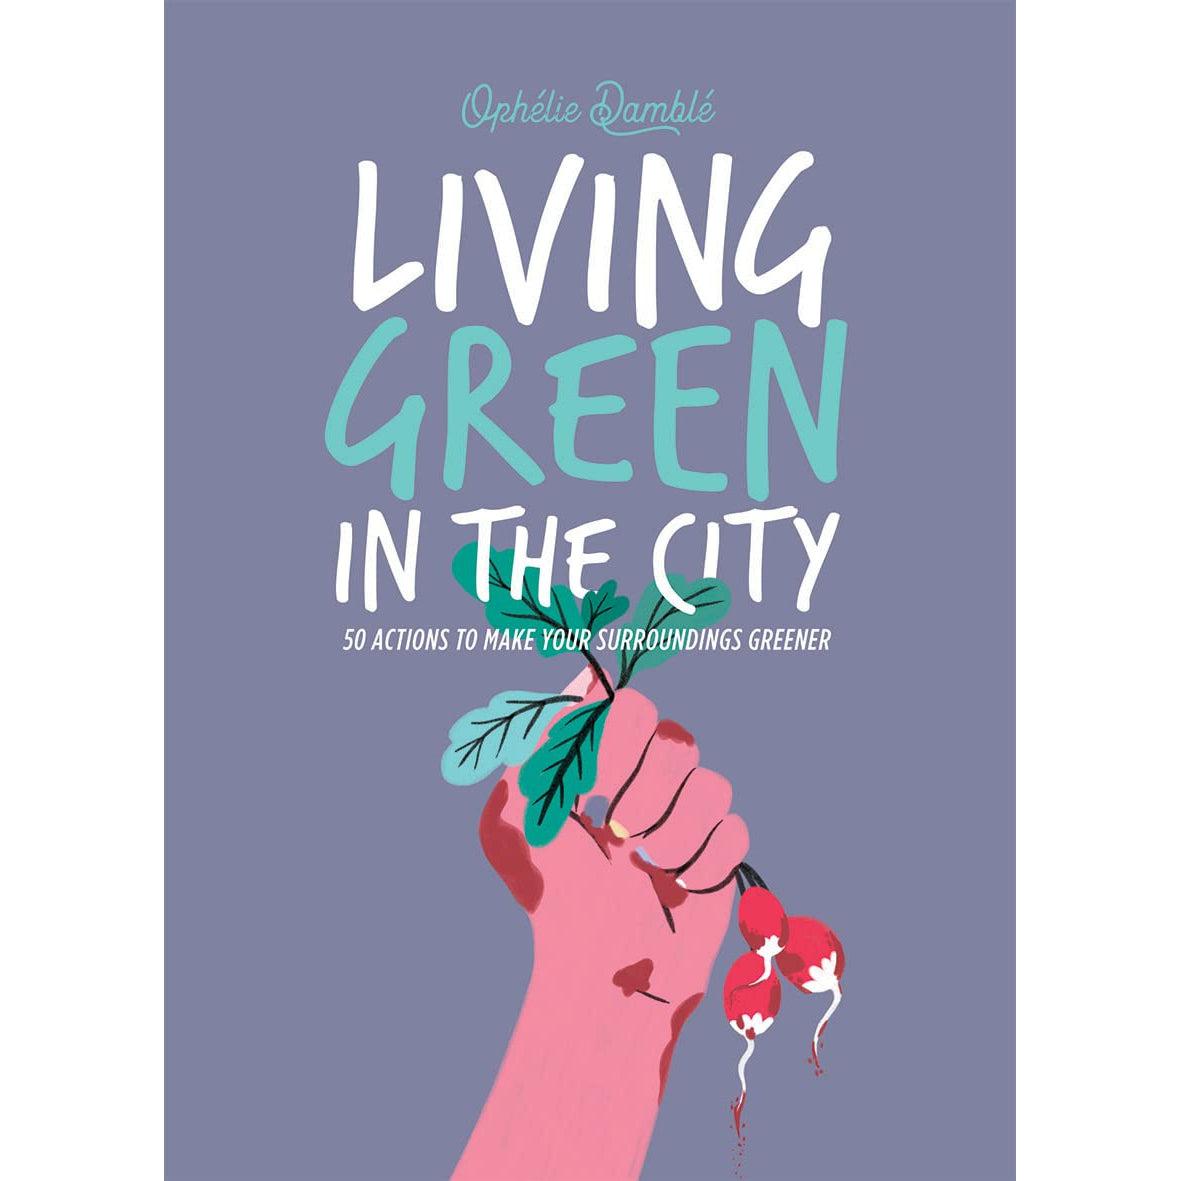 Living Green in the City - 50 Actions to Make Your Surroundings Greener Books Books Various Prettycleanshop